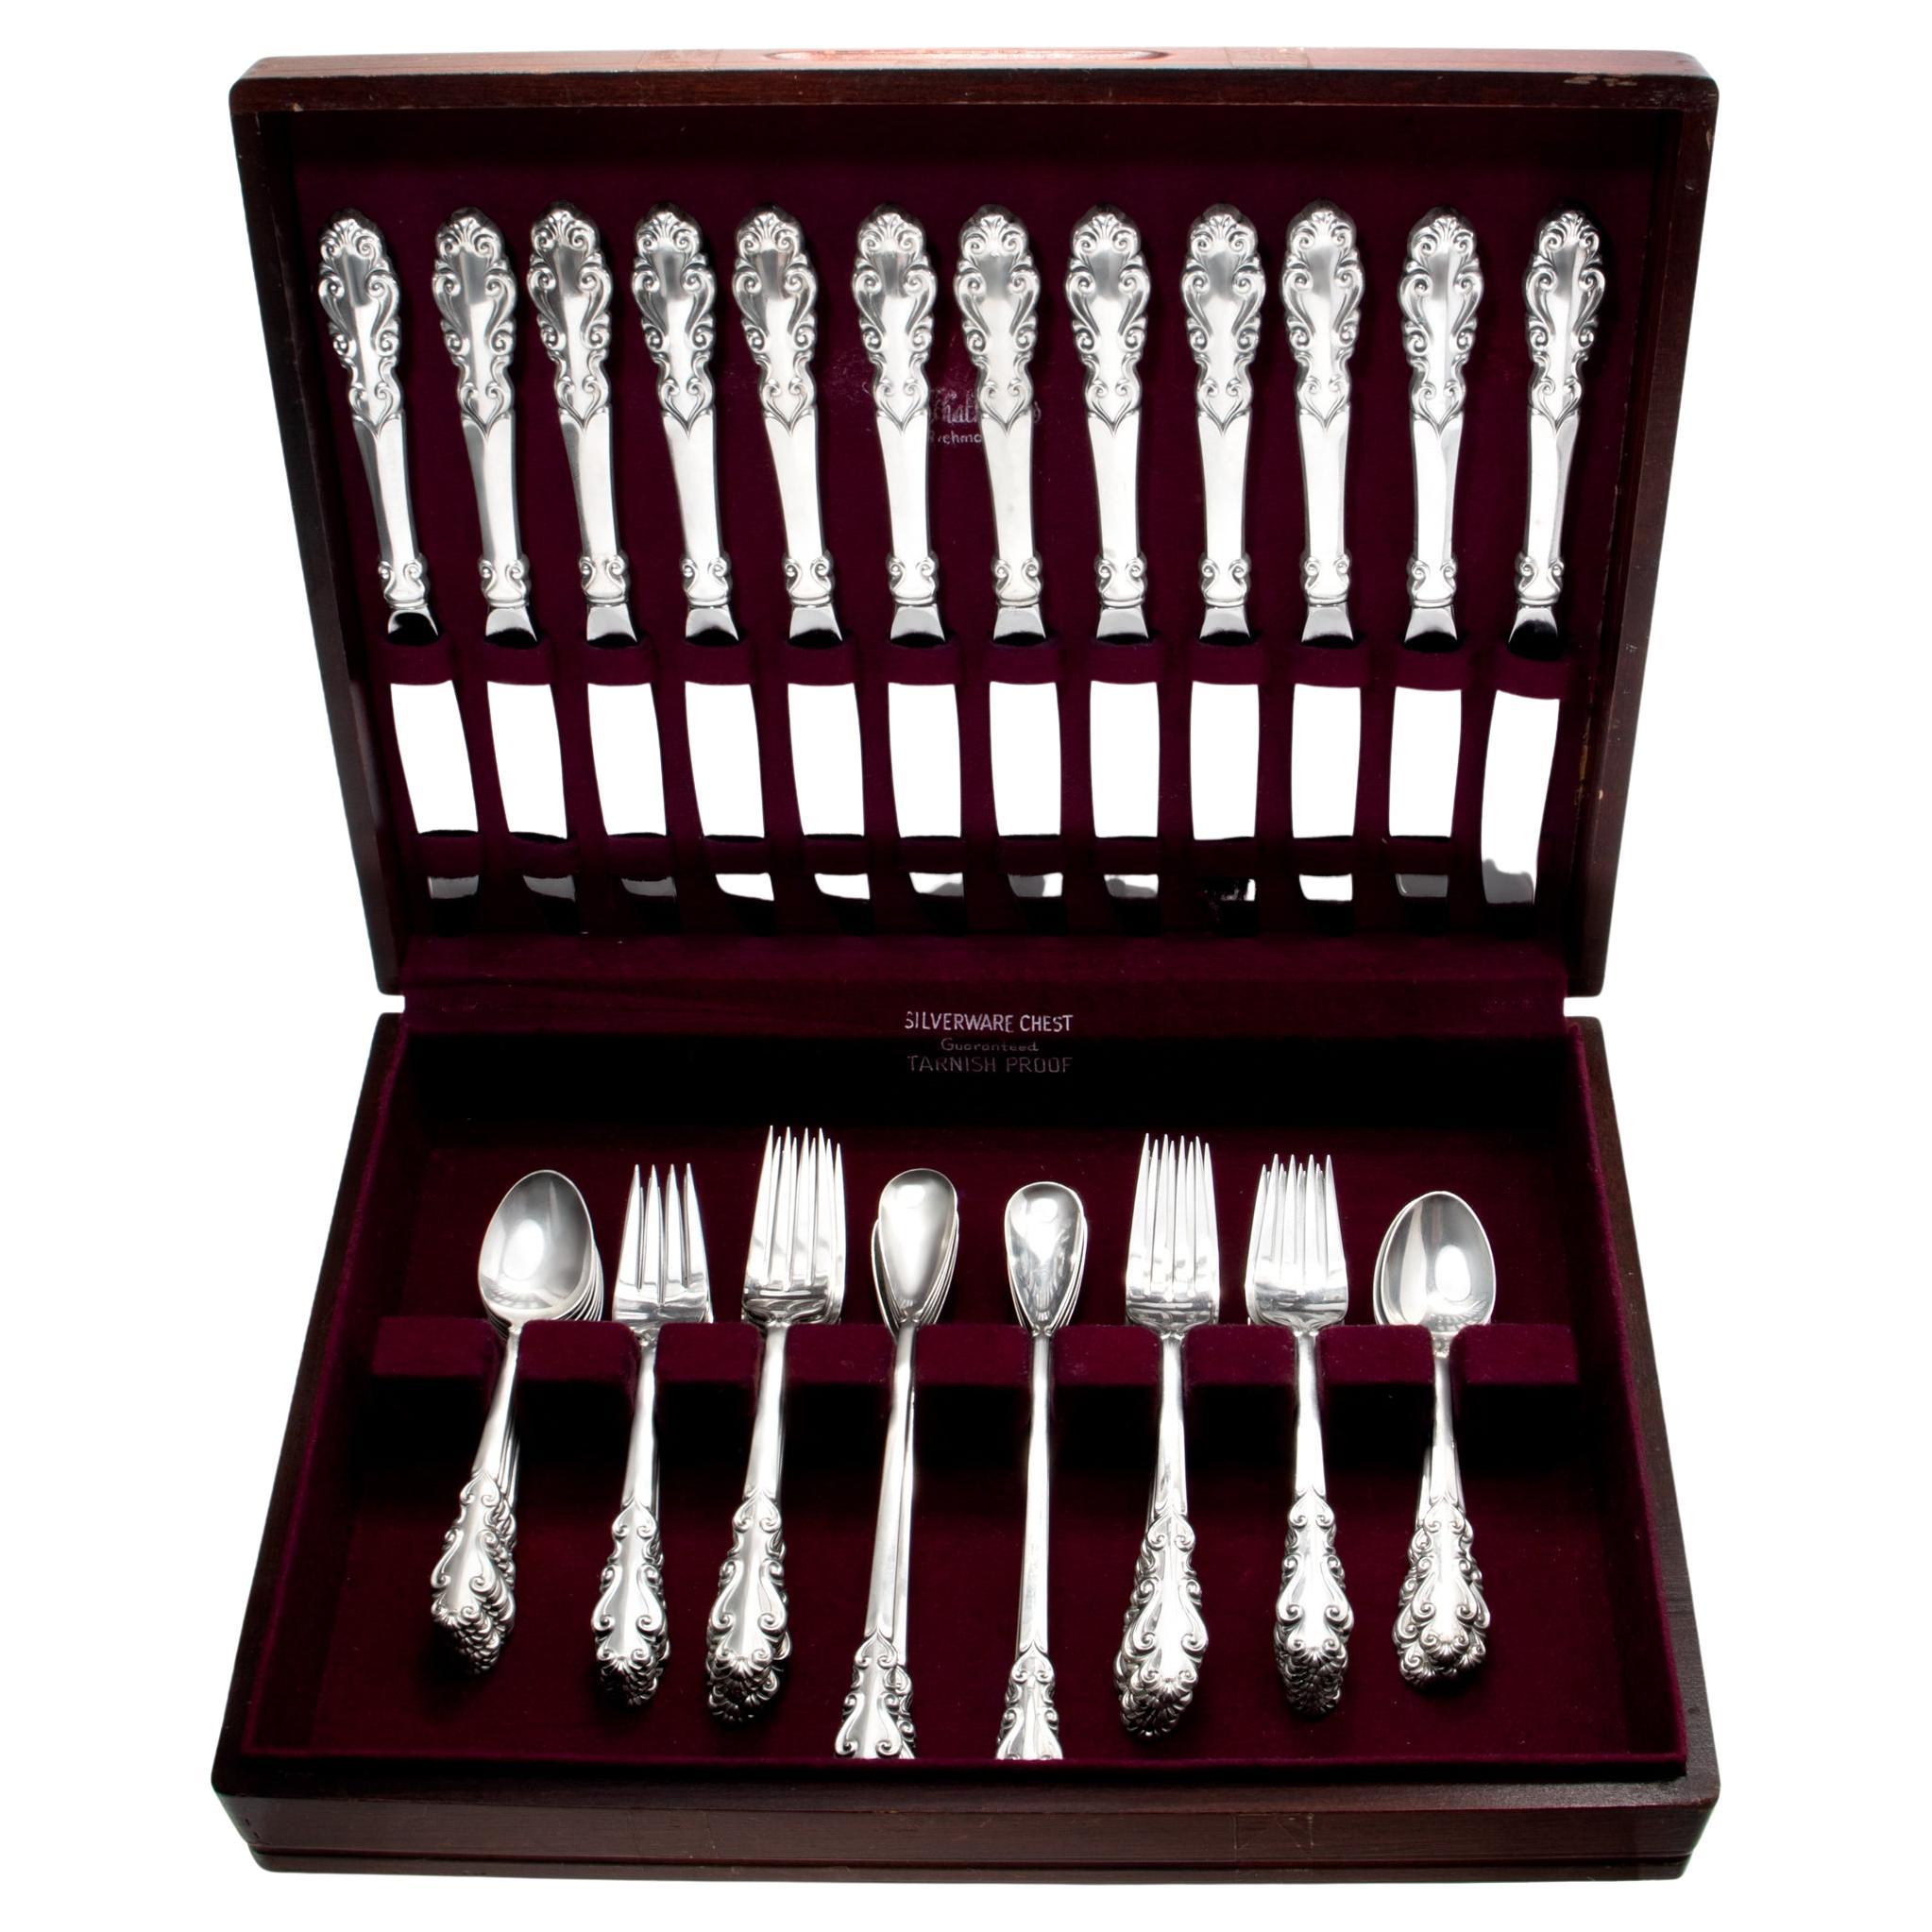 Esplanade Sterling Silver Flatware Set Patented in 1952 by Towle Silversmiths